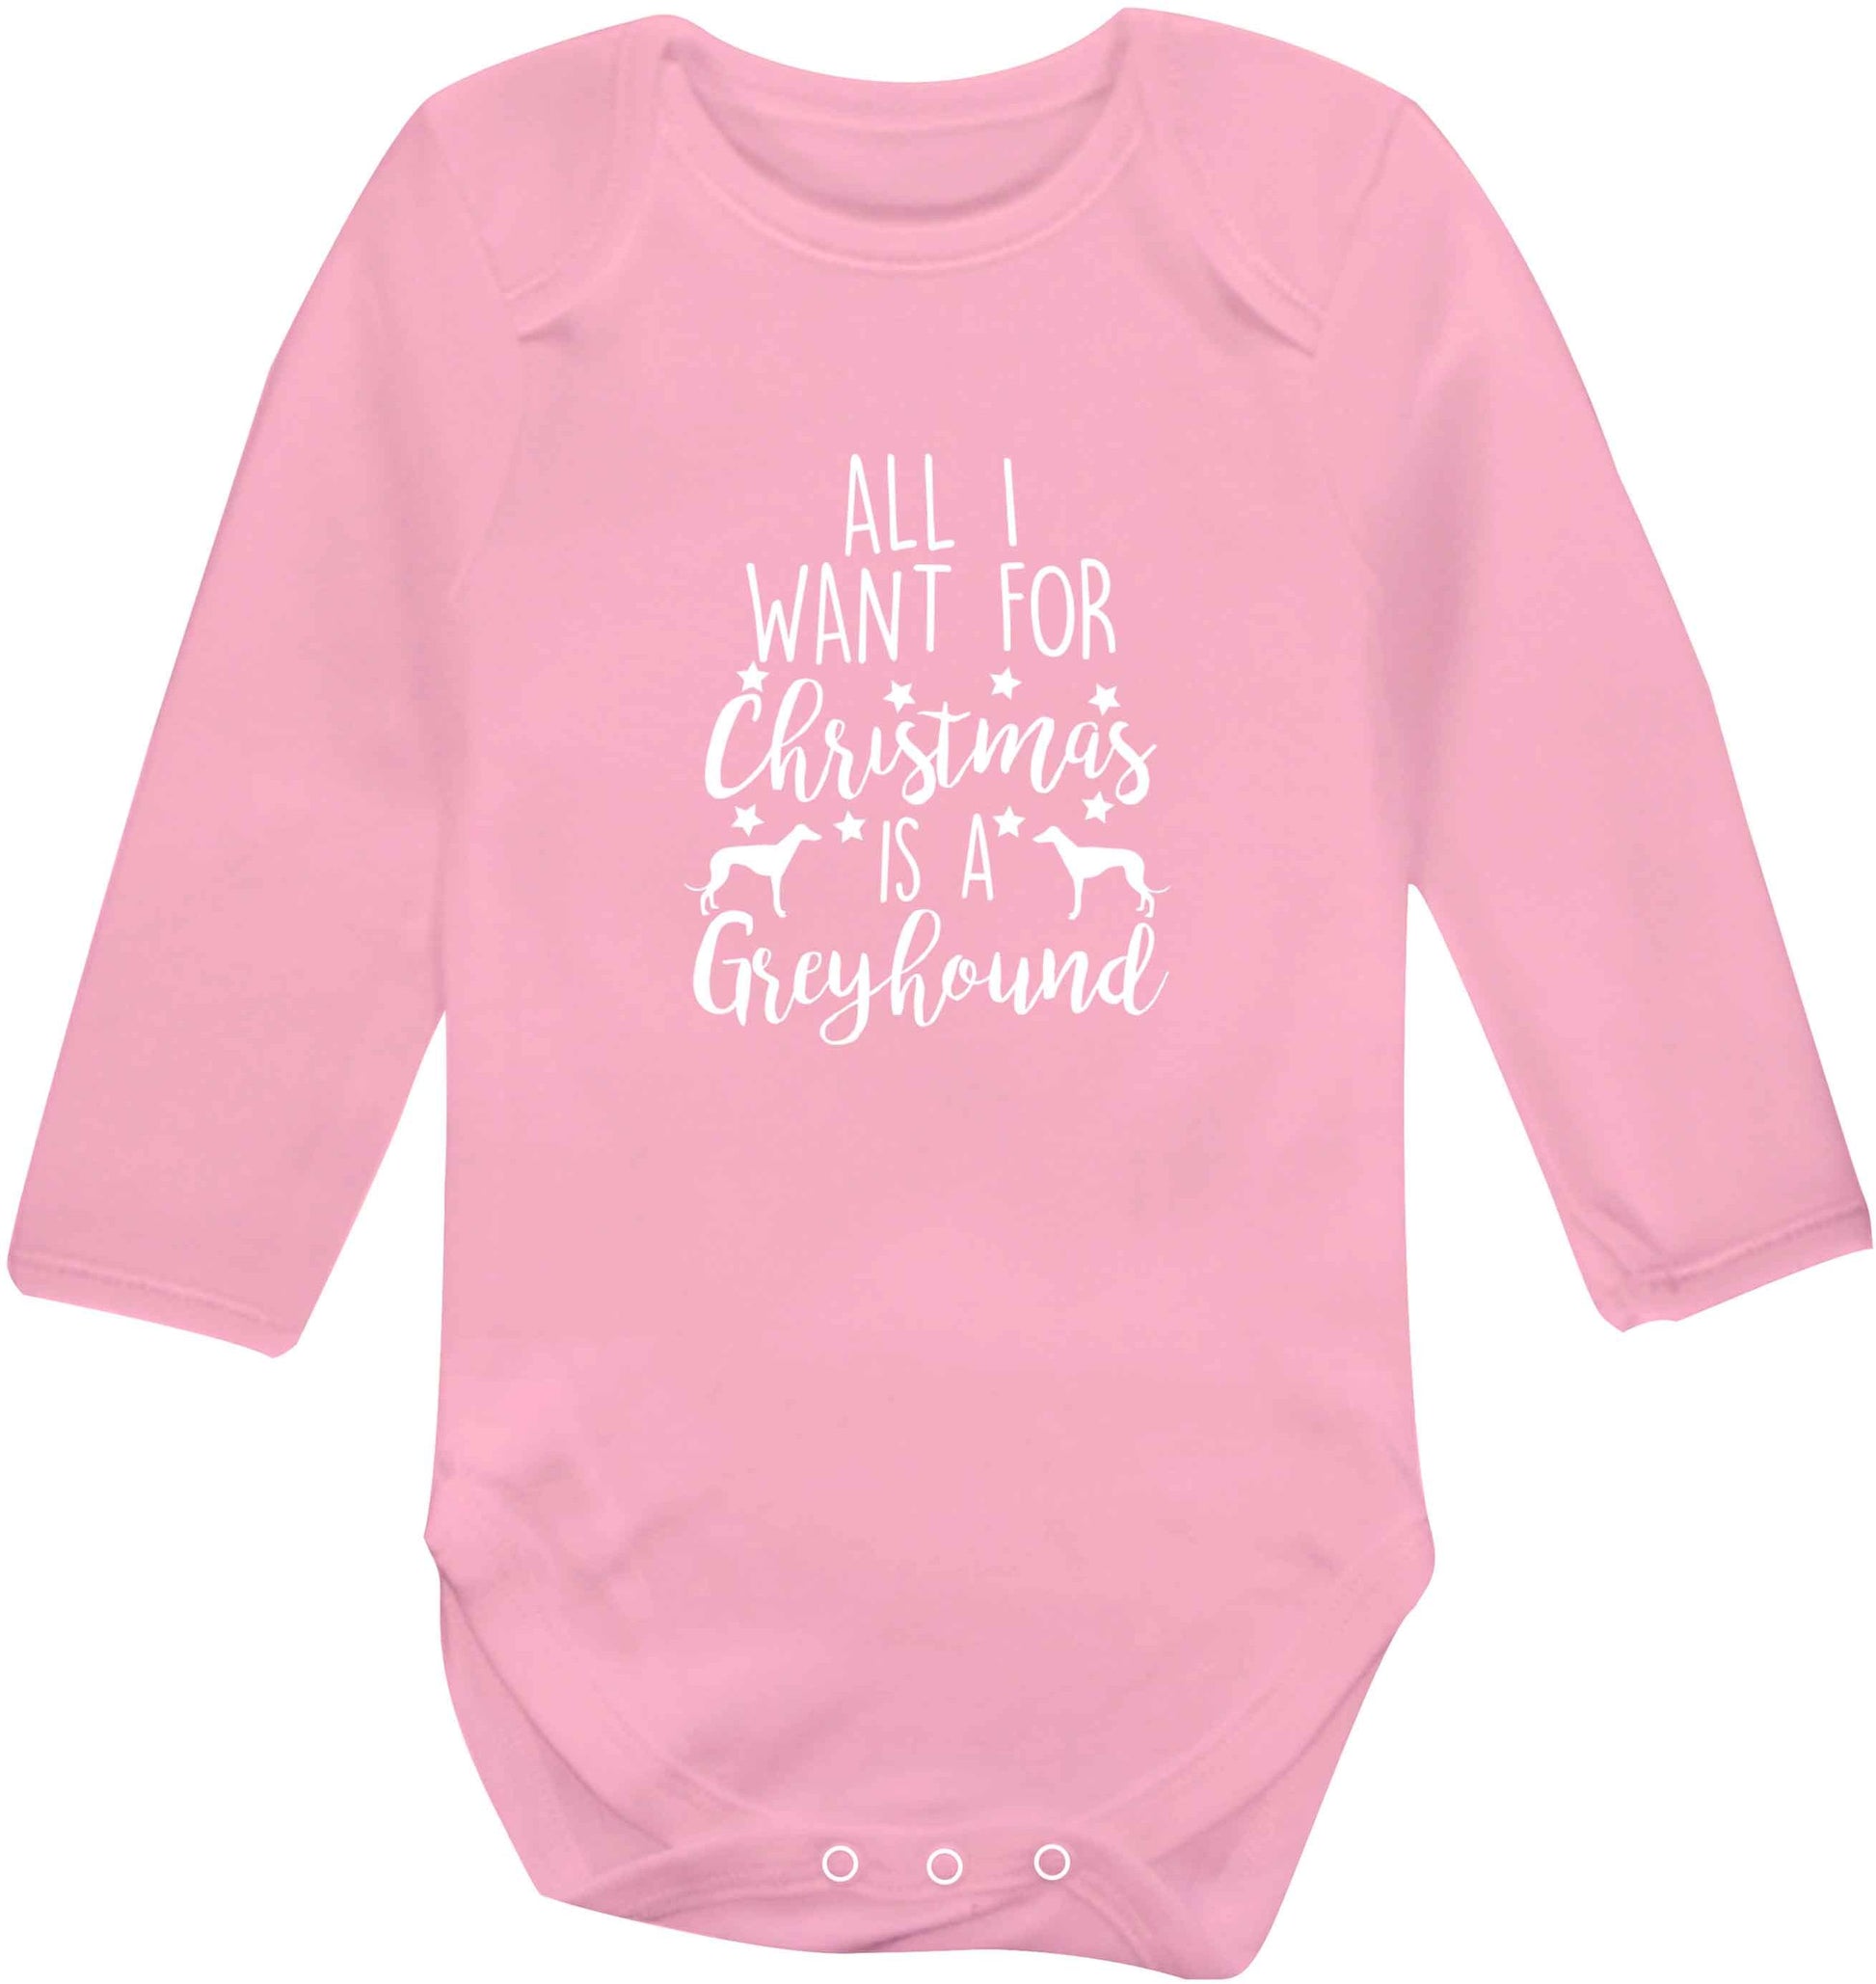 All I want for Christmas is a greyhound baby vest long sleeved pale pink 6-12 months